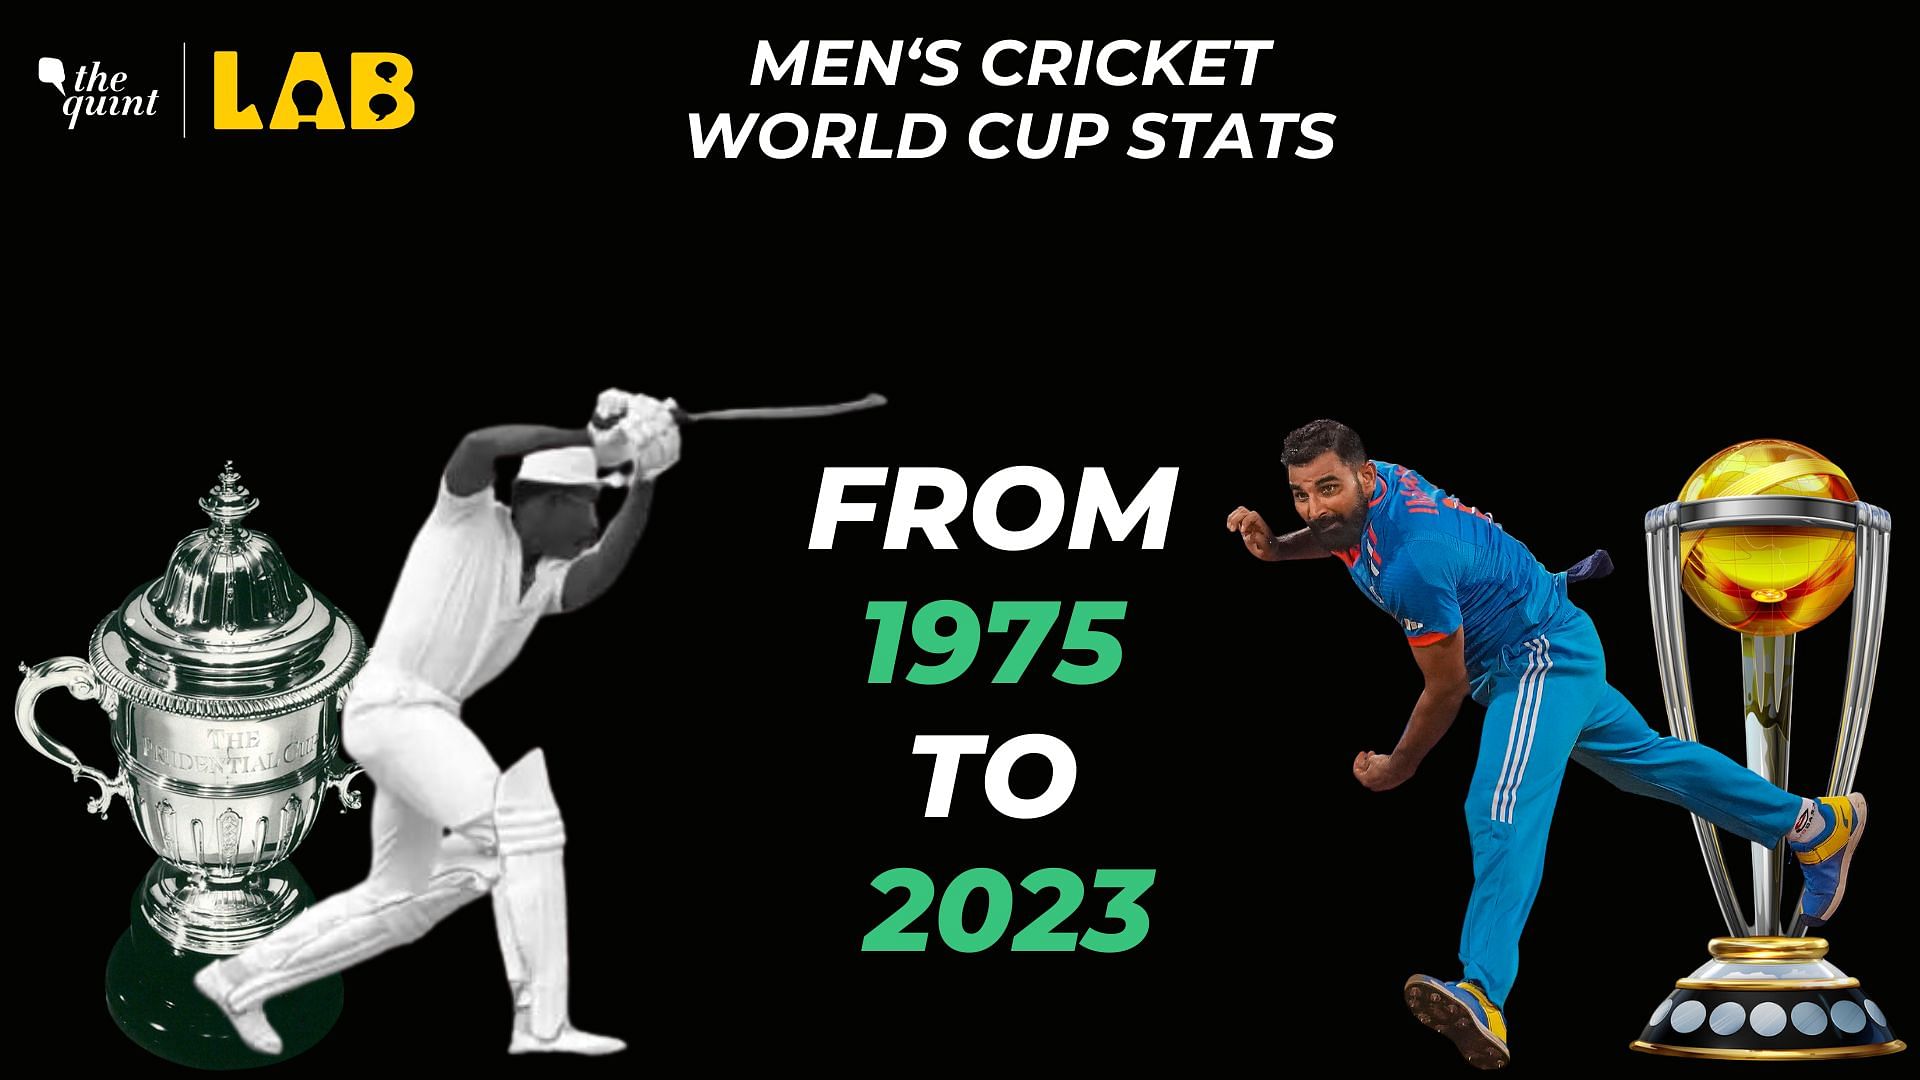 <div class="paragraphs"><p>We take a look at some key parameters and see how the tournament has evolved from its first edition in 1975.</p></div>